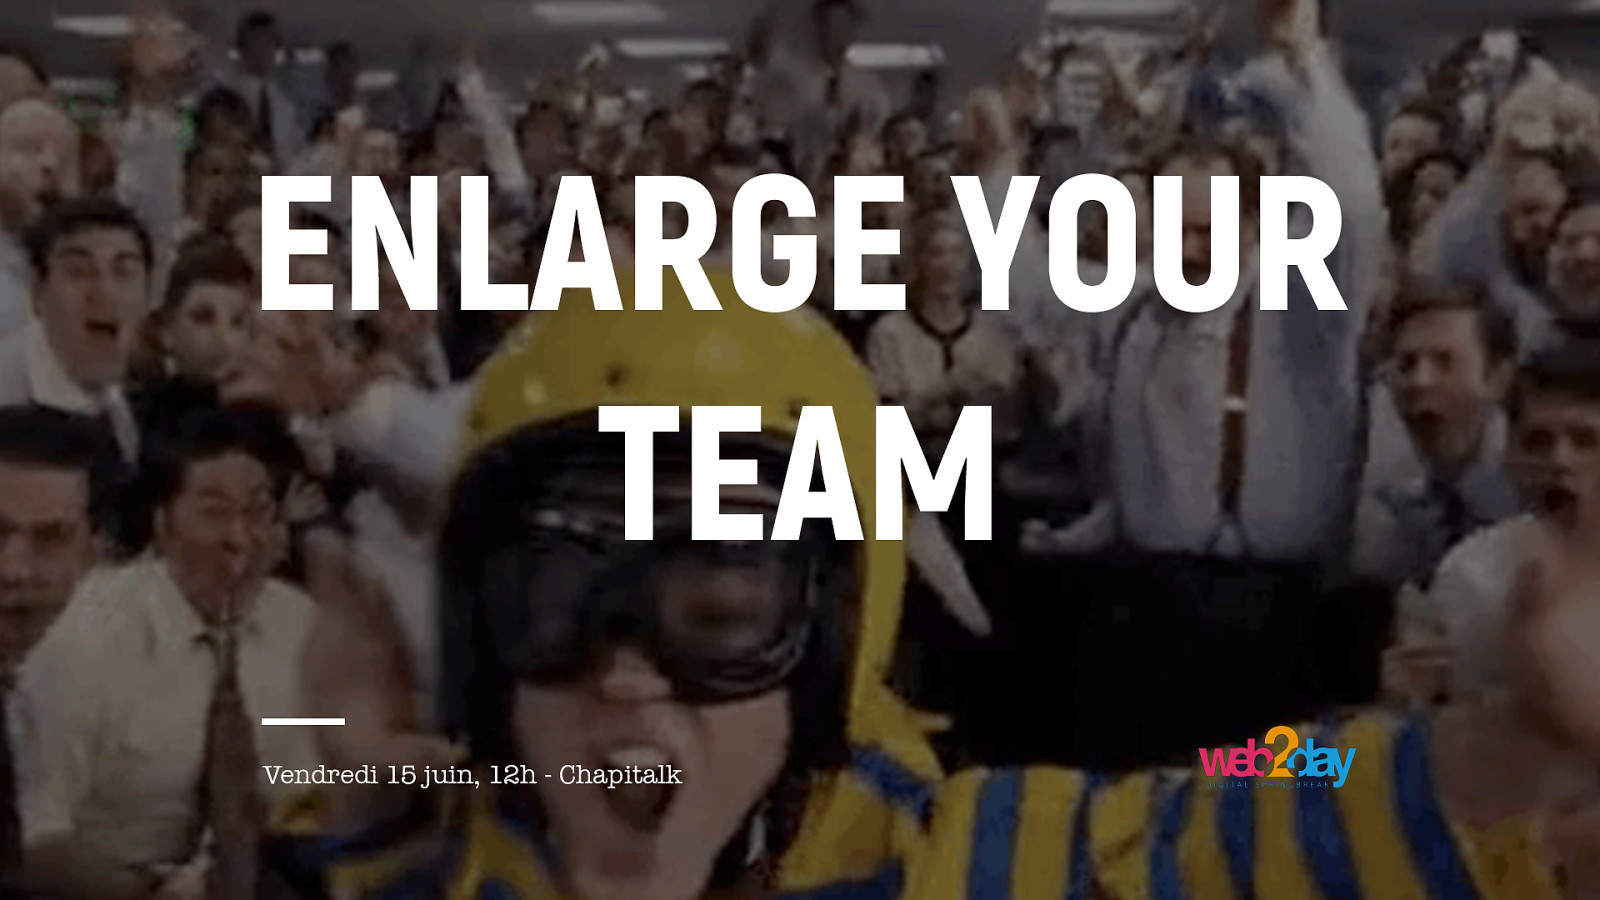 Enlarge your team